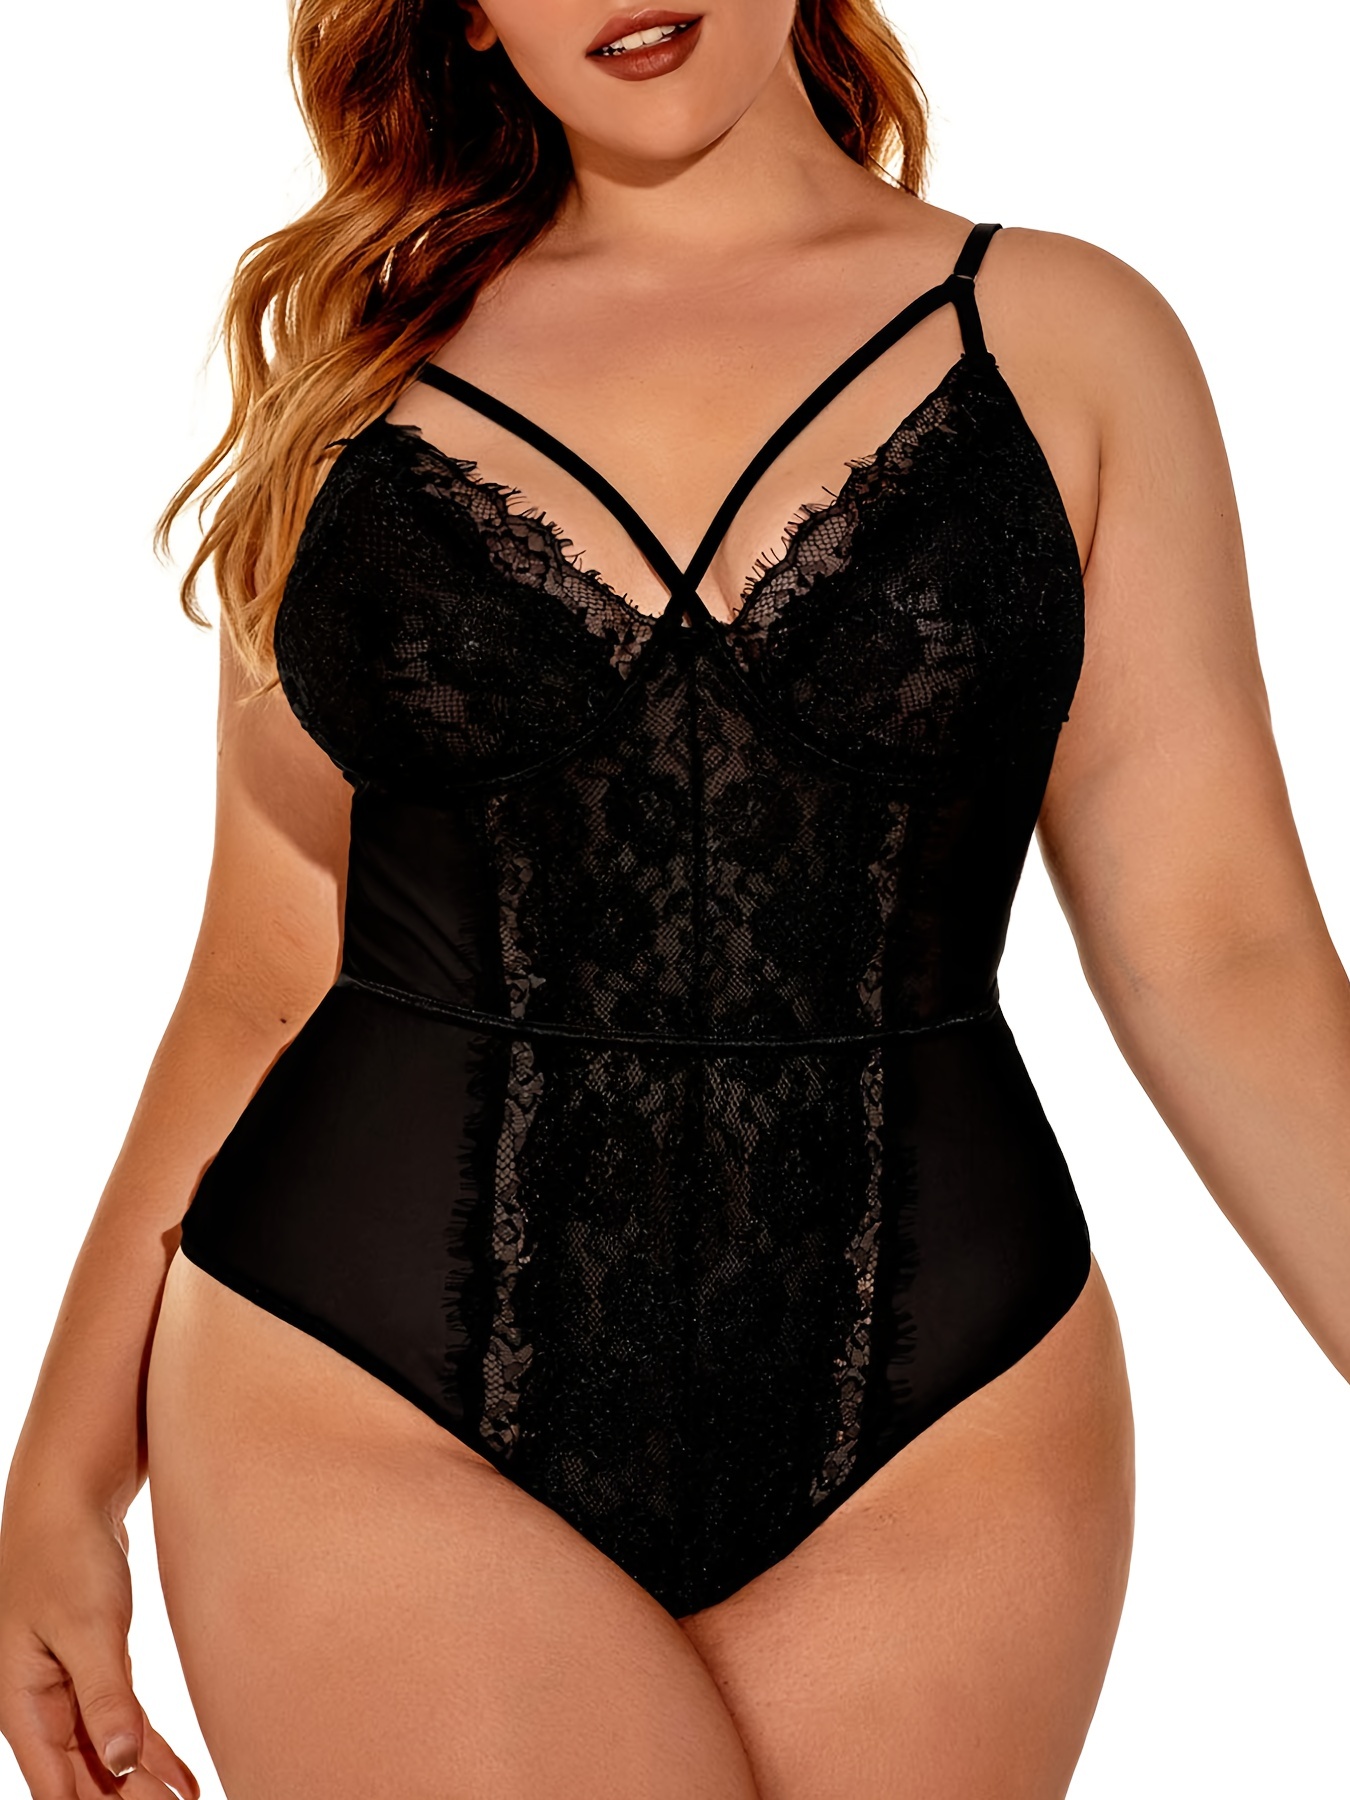 Just Sexy Lingerie Women's and Women's Plus Strappy and Stretchy Bodysuit